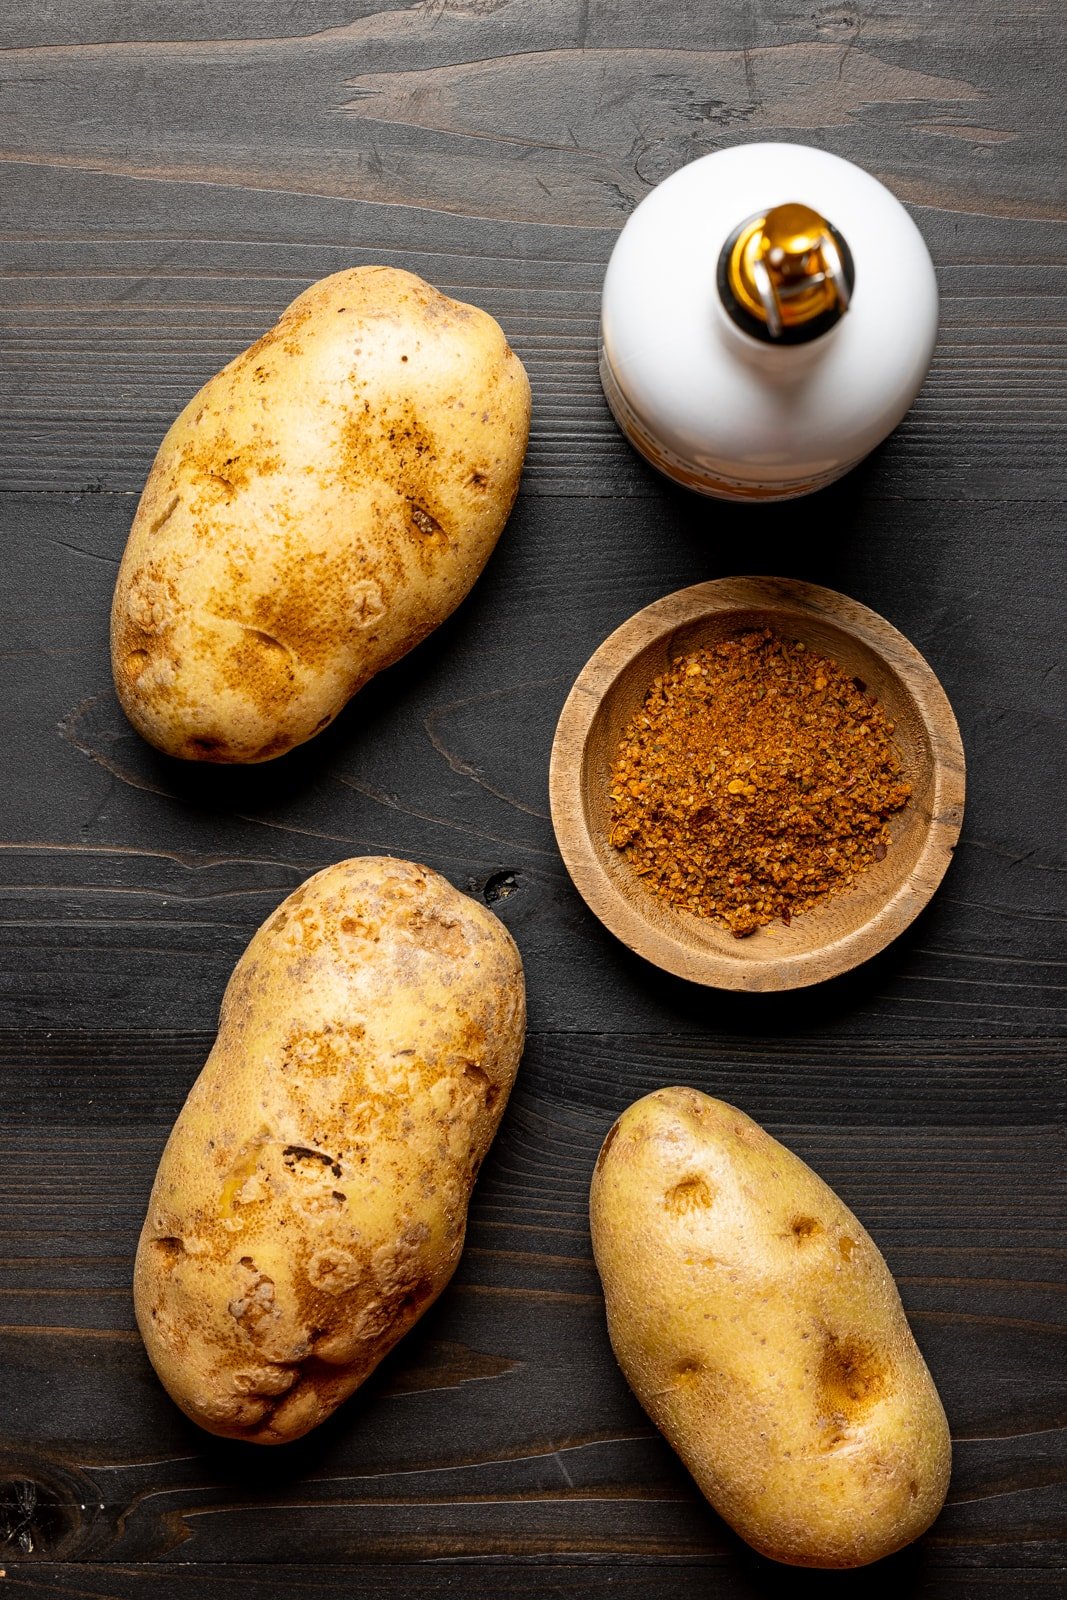 Three large russet potatoes on a black wood table with Cajun seasoning, and a bottle of olive oil.